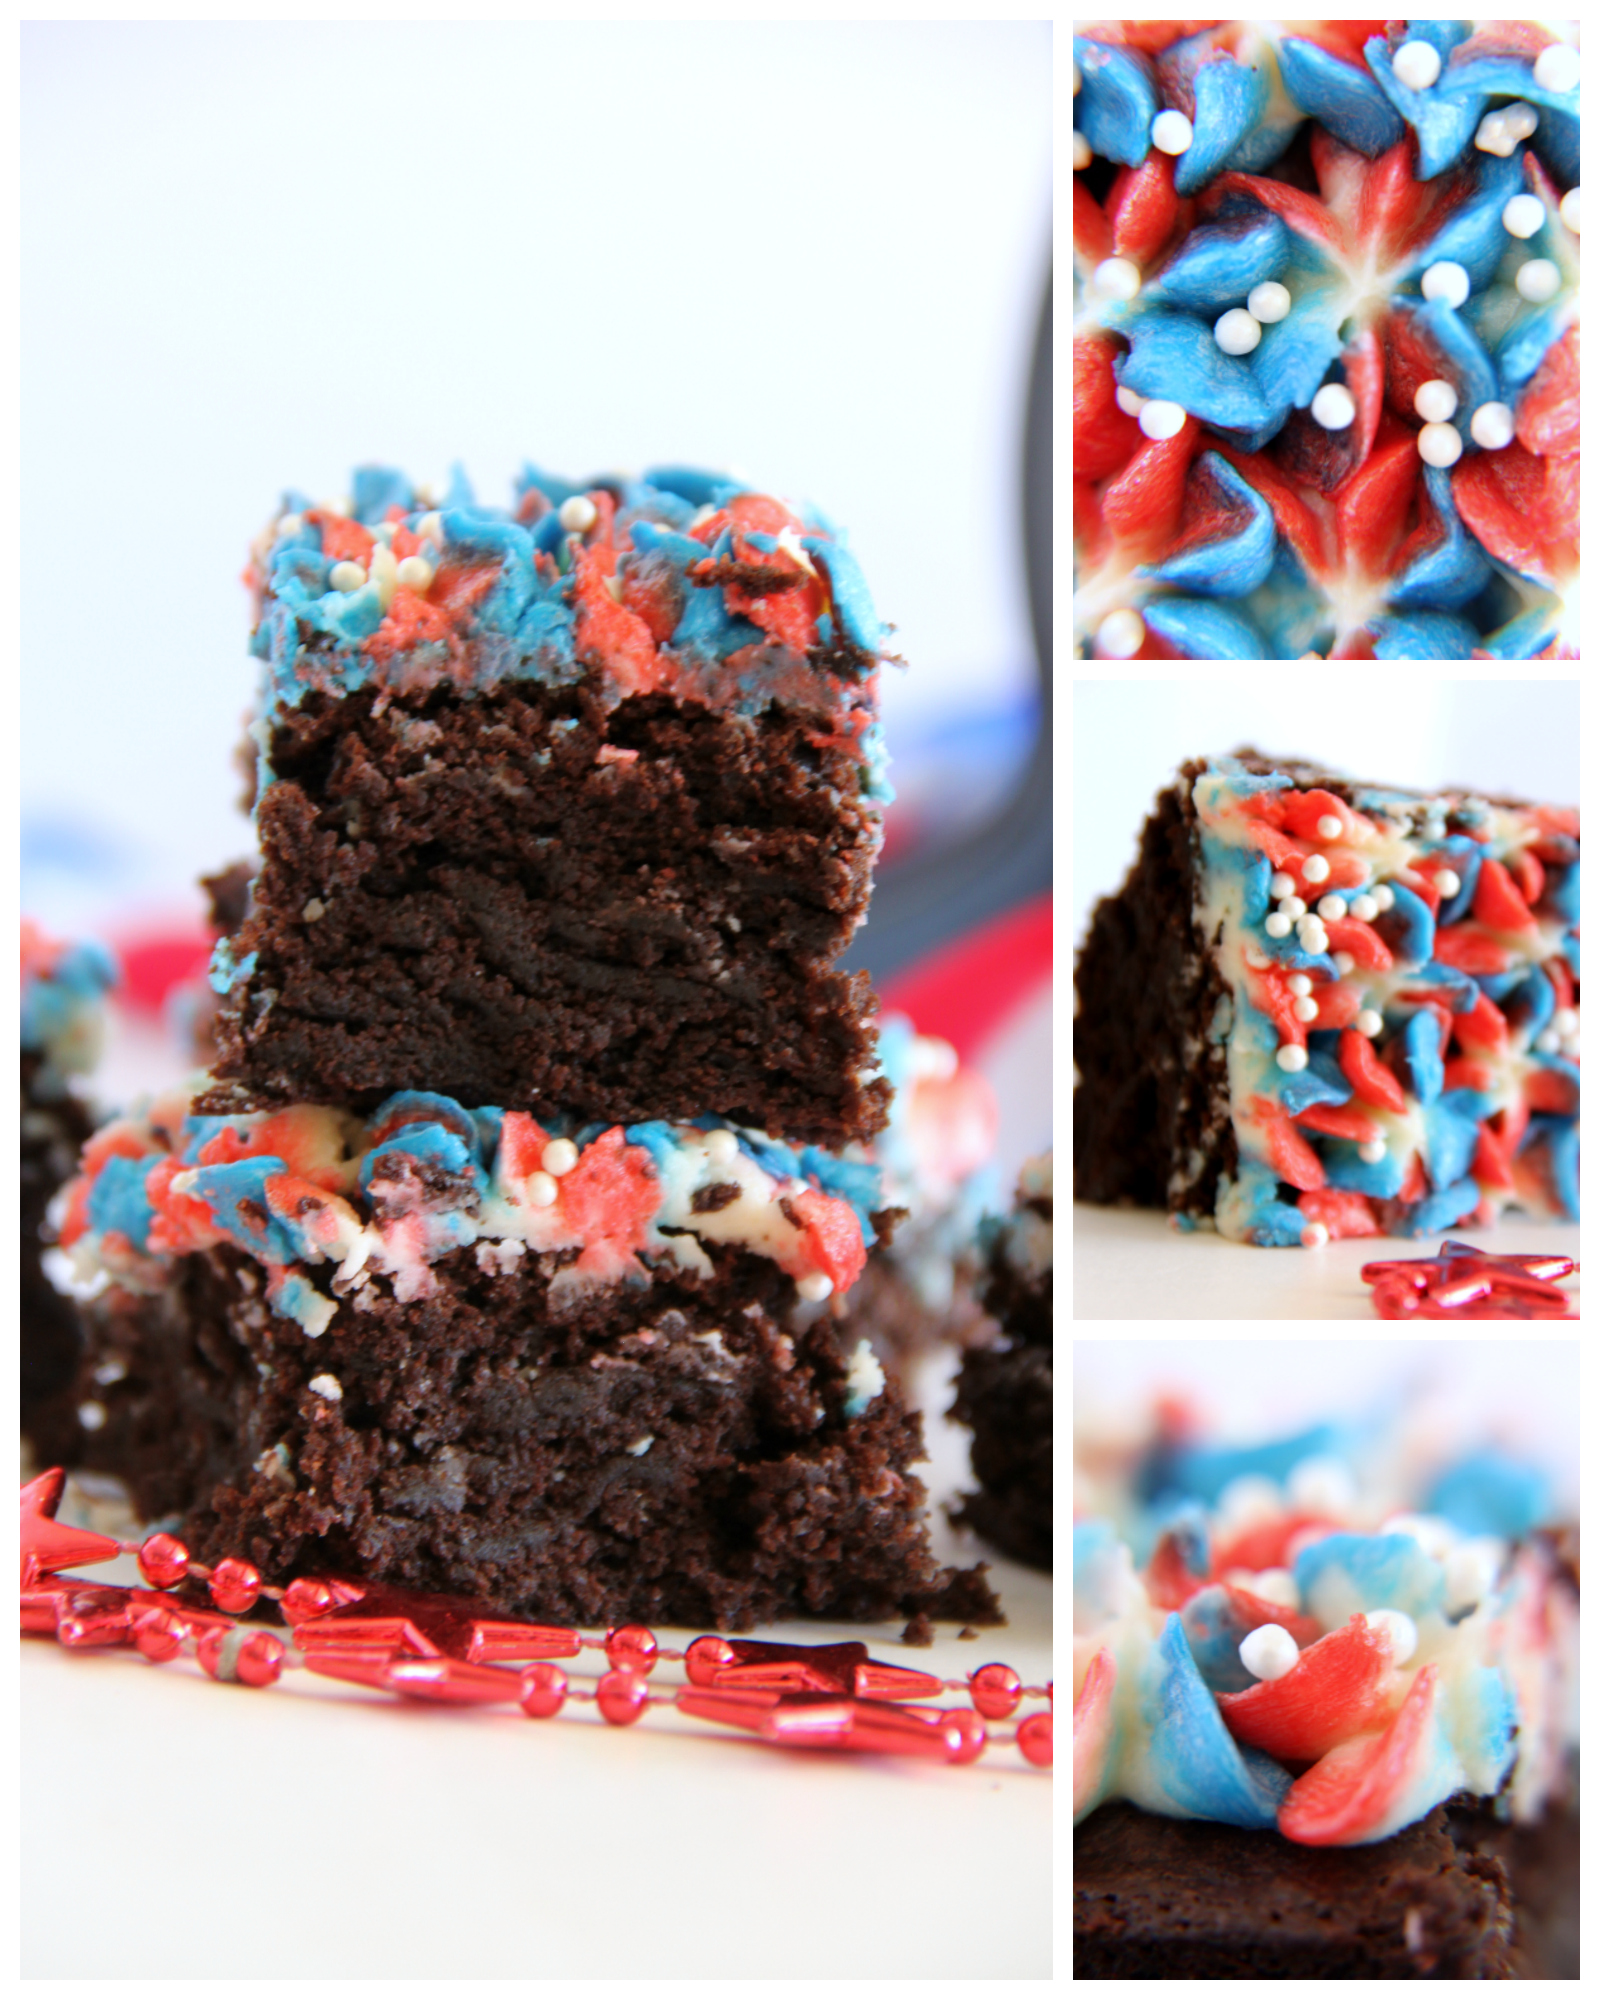 These festive Red, White, & Blue Patriotic Brownies are a must have for any summer party!